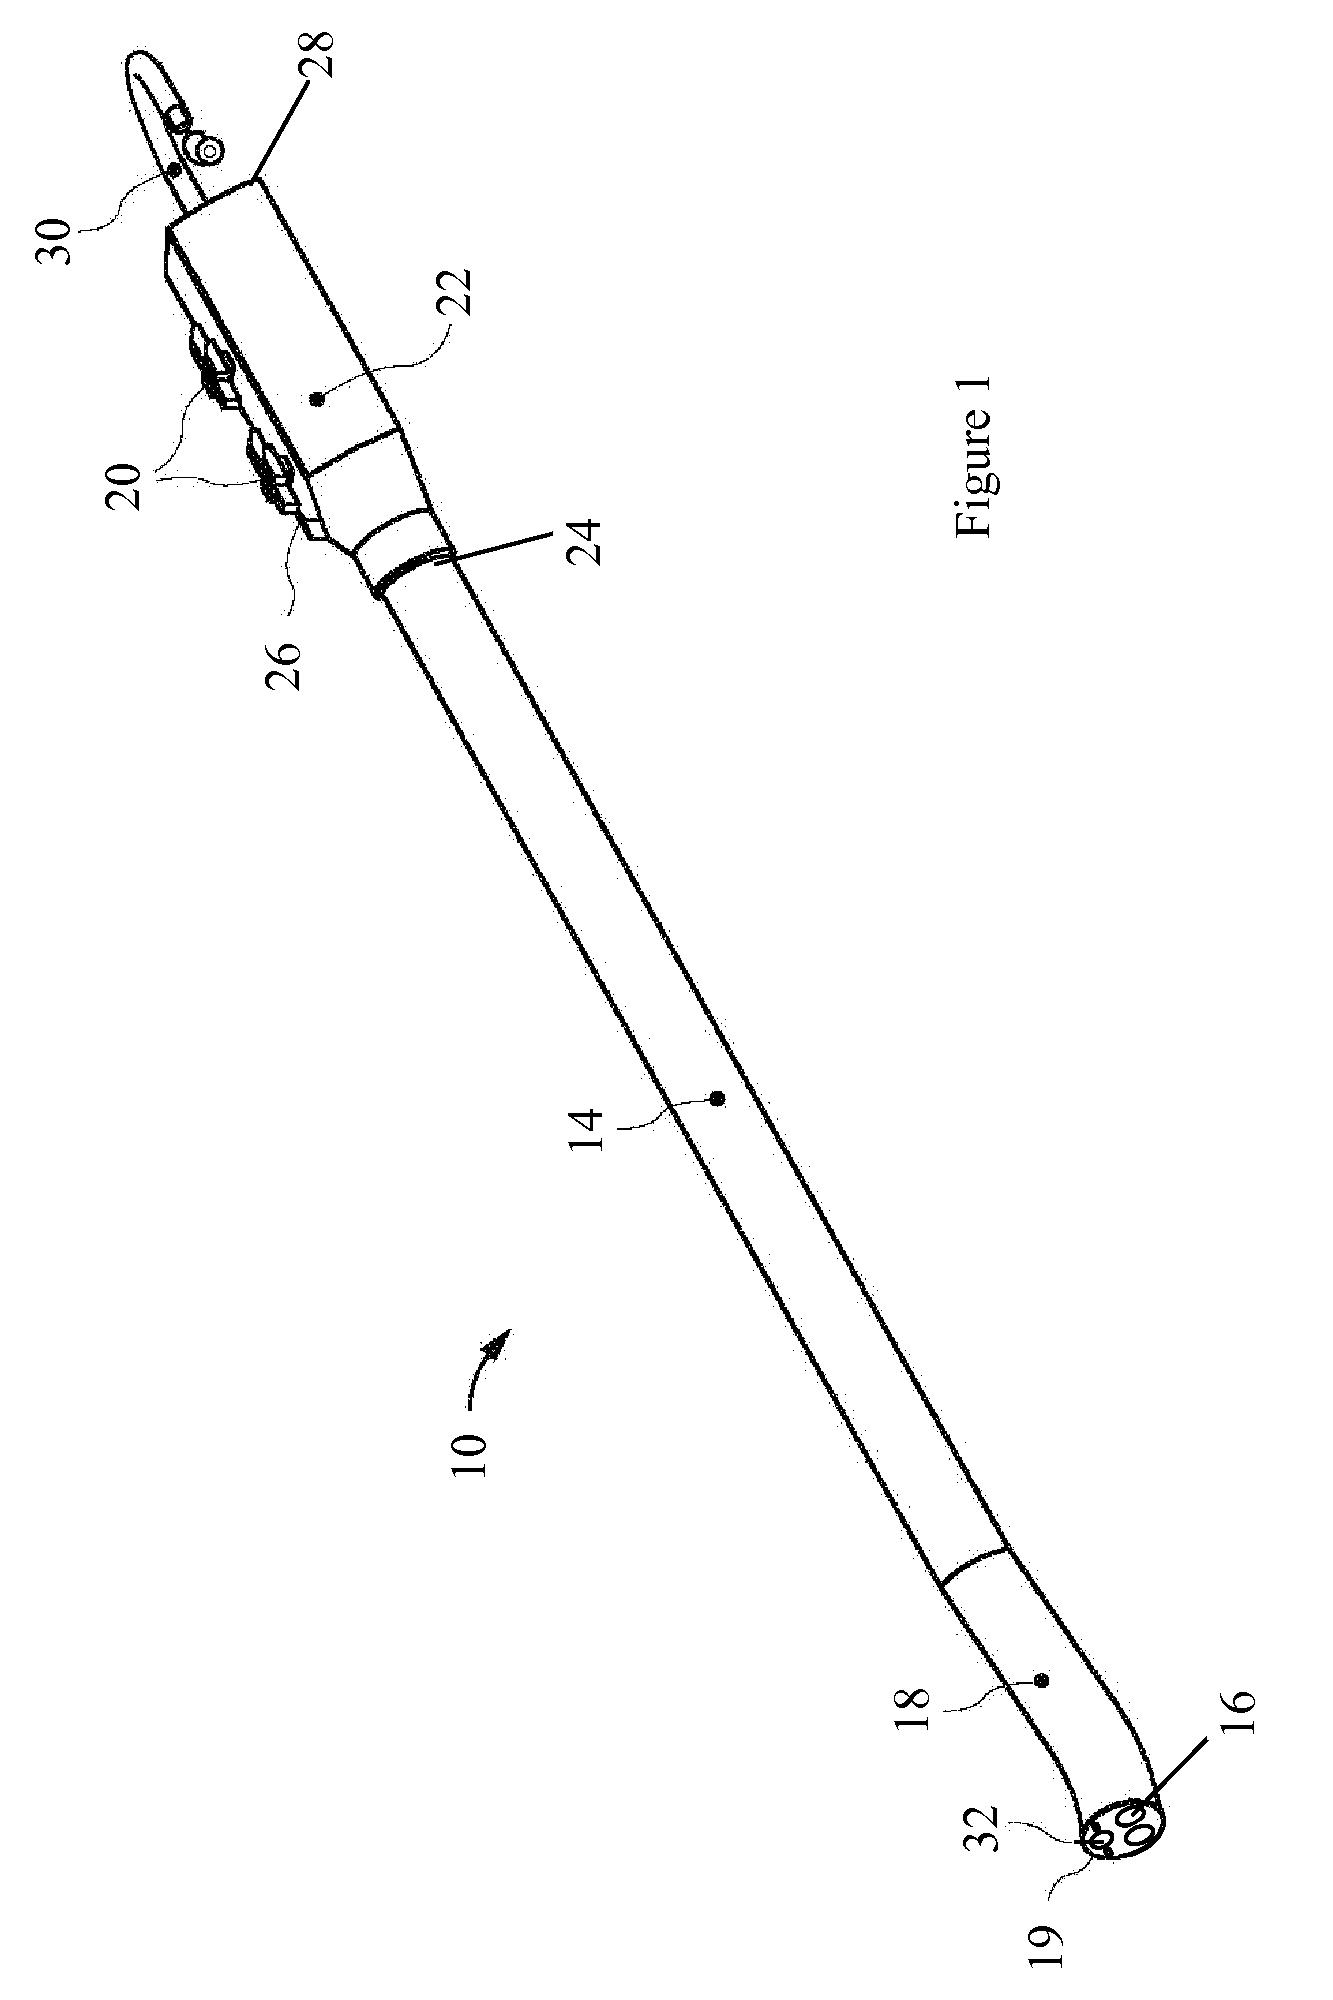 Vibratory Device, Endoscope Having Such A Device, Method For Configuring An Endoscope, And Method Of Reducing Looping Of An Endoscope.